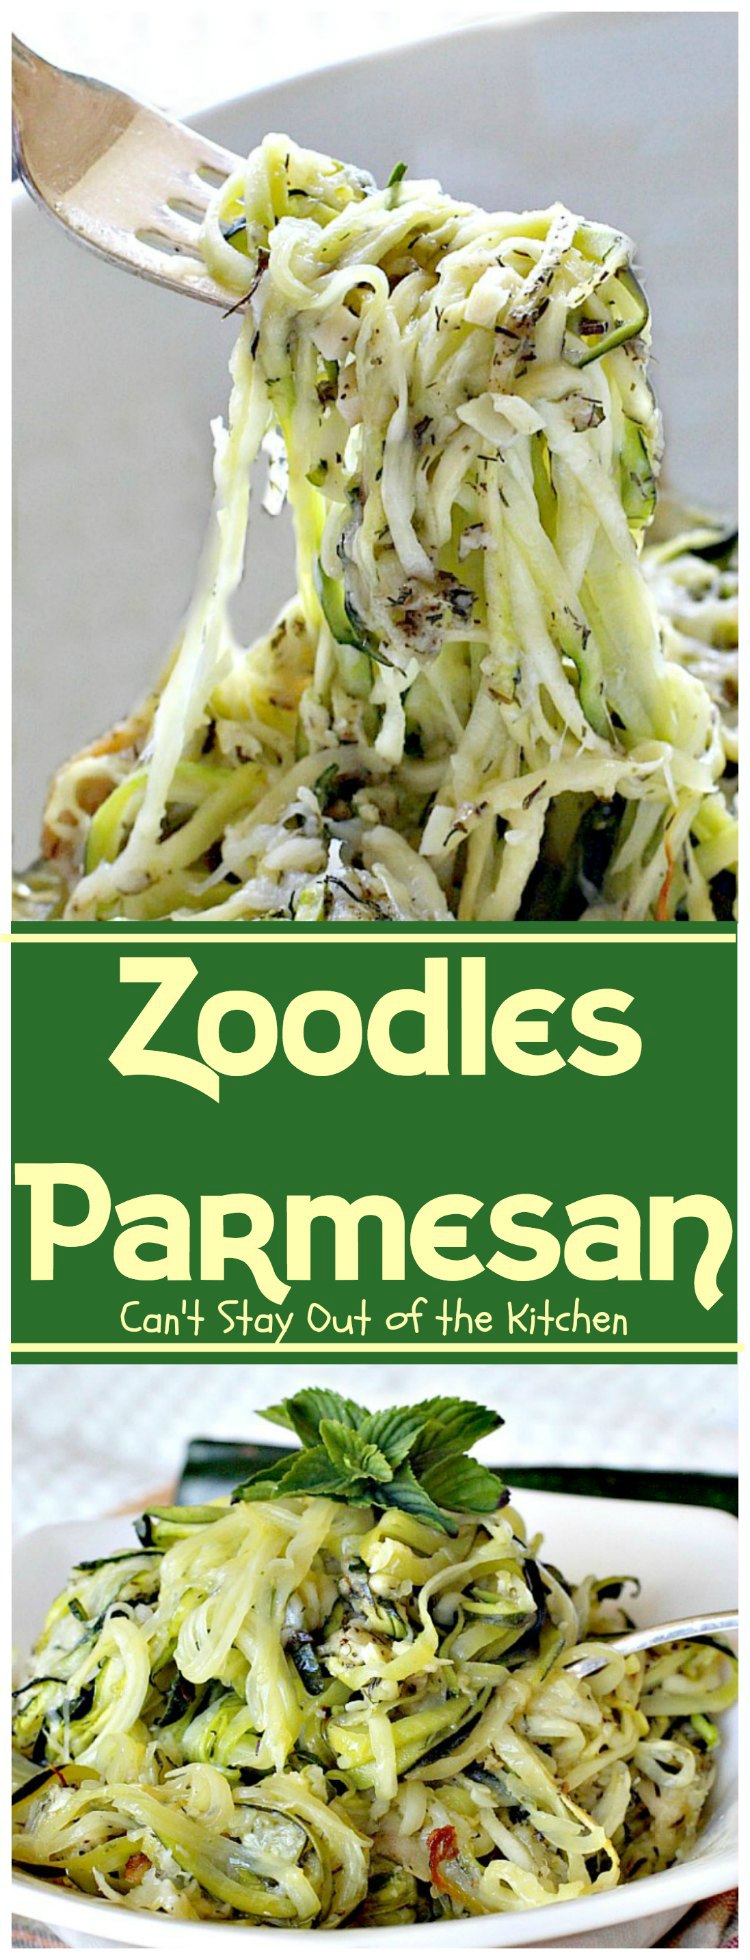 Zoodles Parmesan | Can't Stay Out of the Kitchen